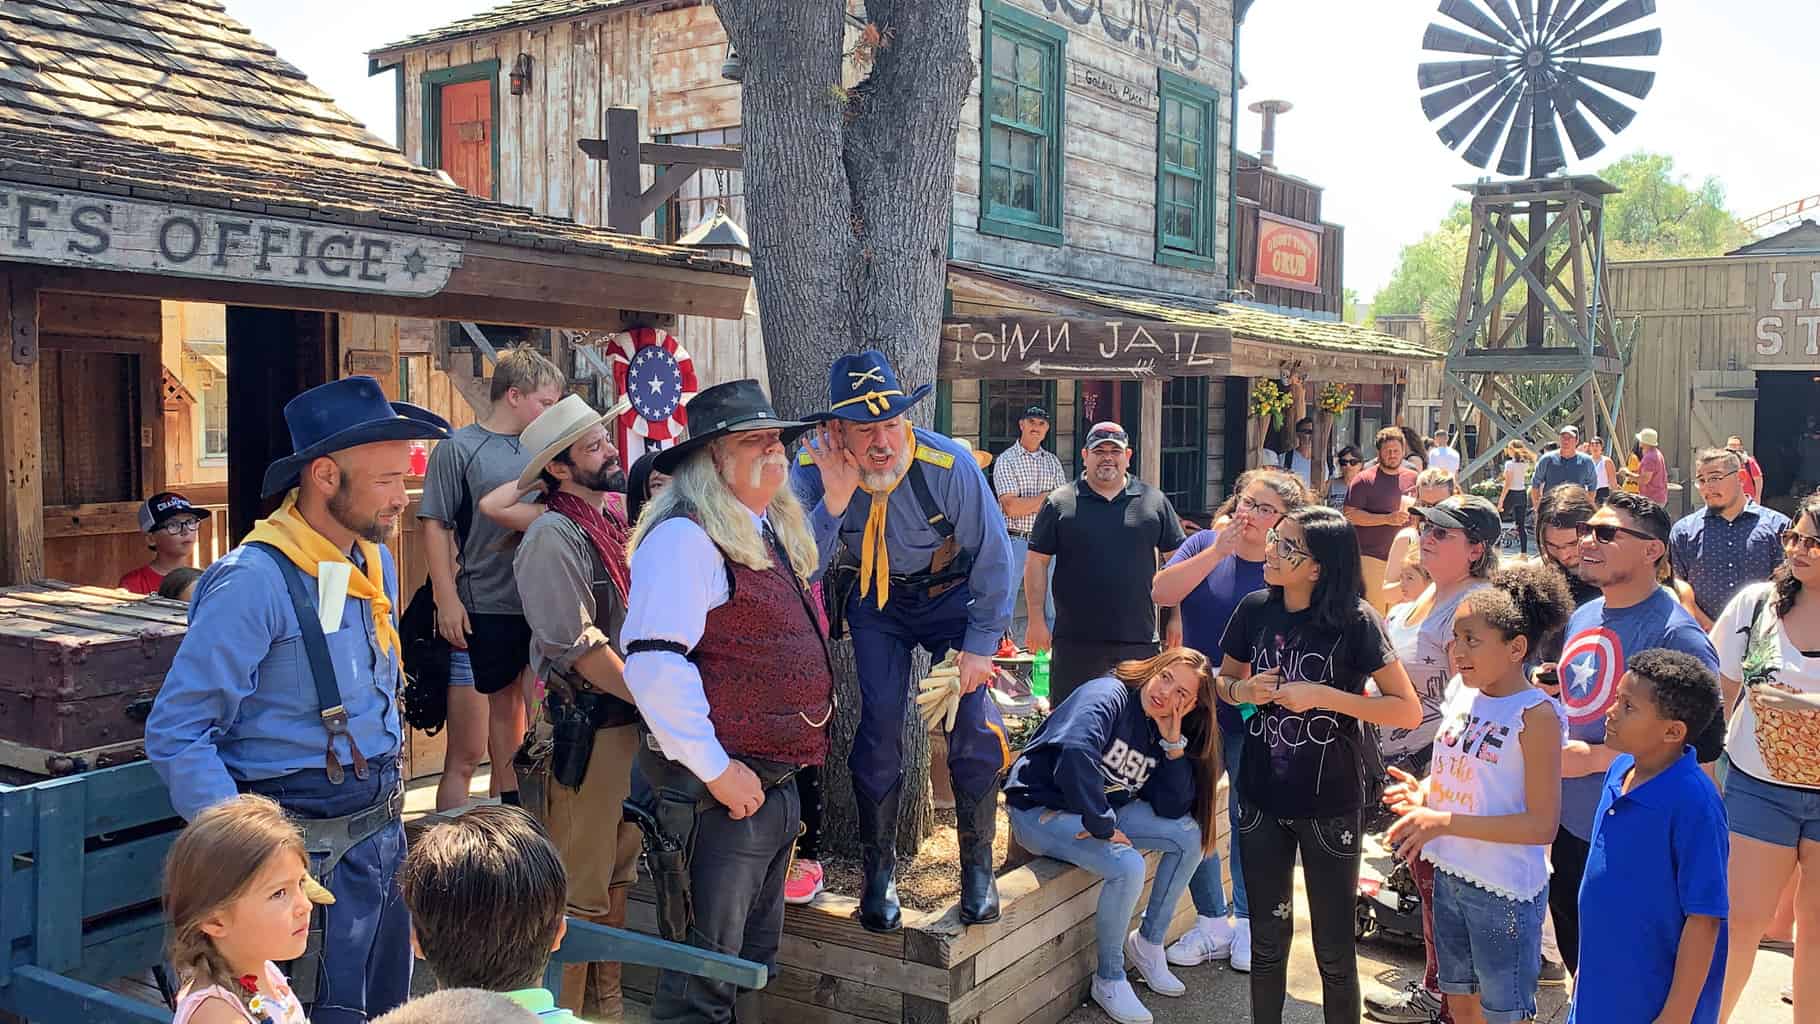 Are you looking for a fun family outing this summer? Then check out Ghost Town Alive at Knott's Berry Farm in Buena Park, California. Ghost Town Alive is chocked full of fun activities like a photo scavenger hunt, hoedown, Snoppy magic show and more.